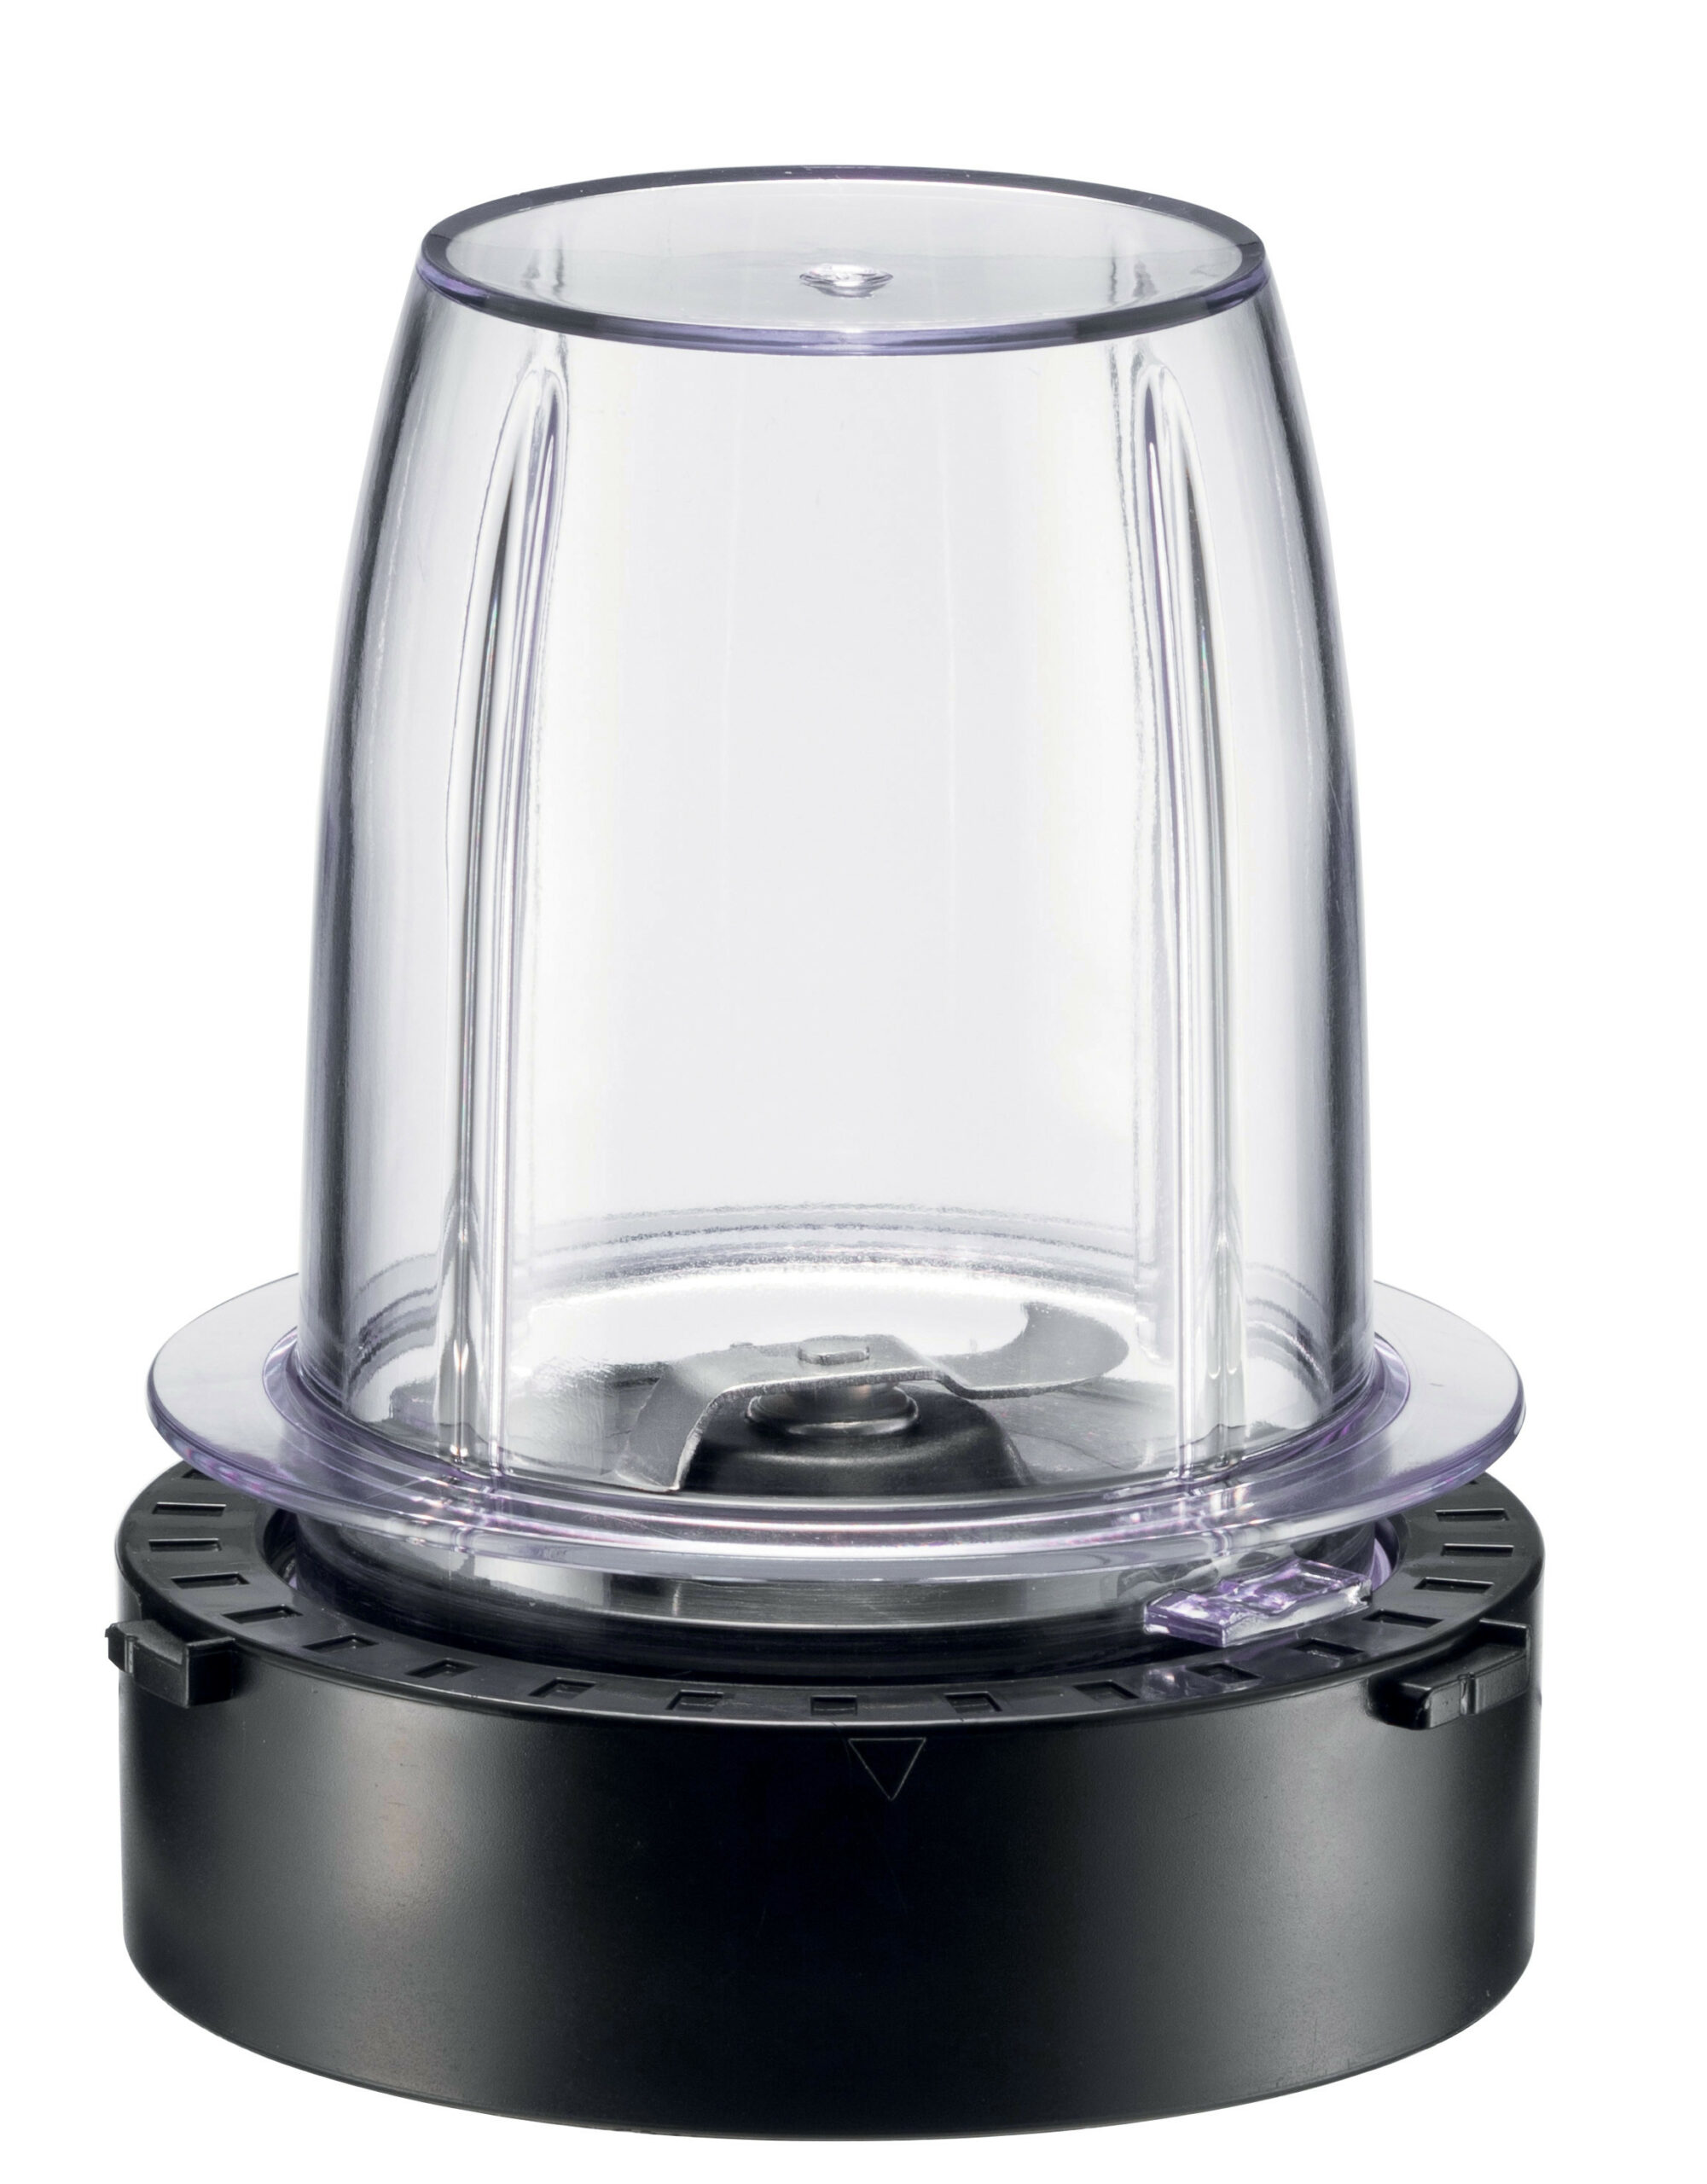 KENWOOD Metal Blender with Glass Jar and 1 mill BLM45.240SS - OGTMart